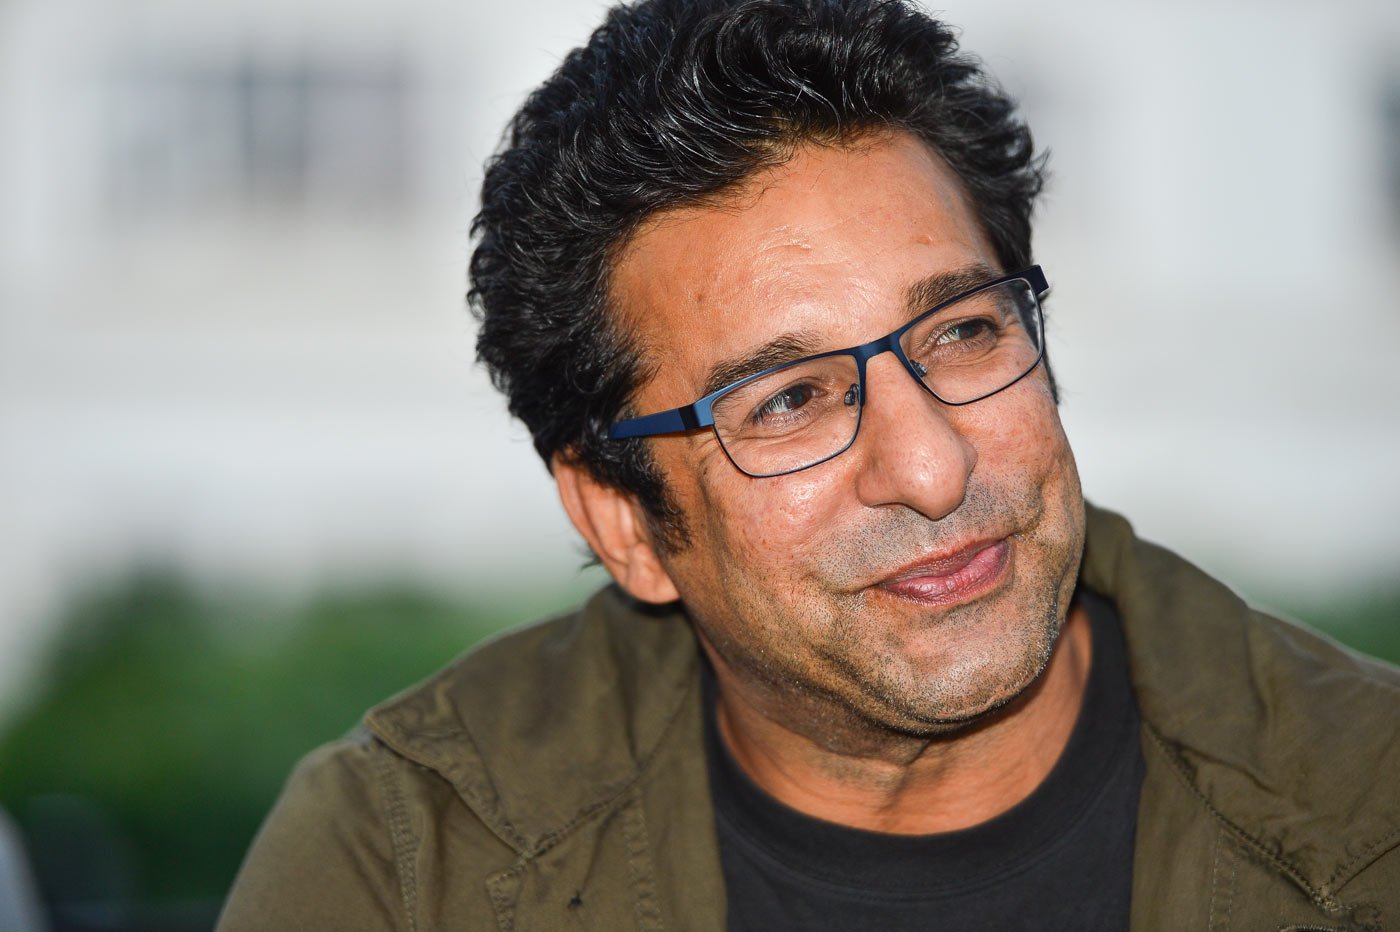 wasim akram was involved in a firing incident two years ago photo courtesy cricinfo